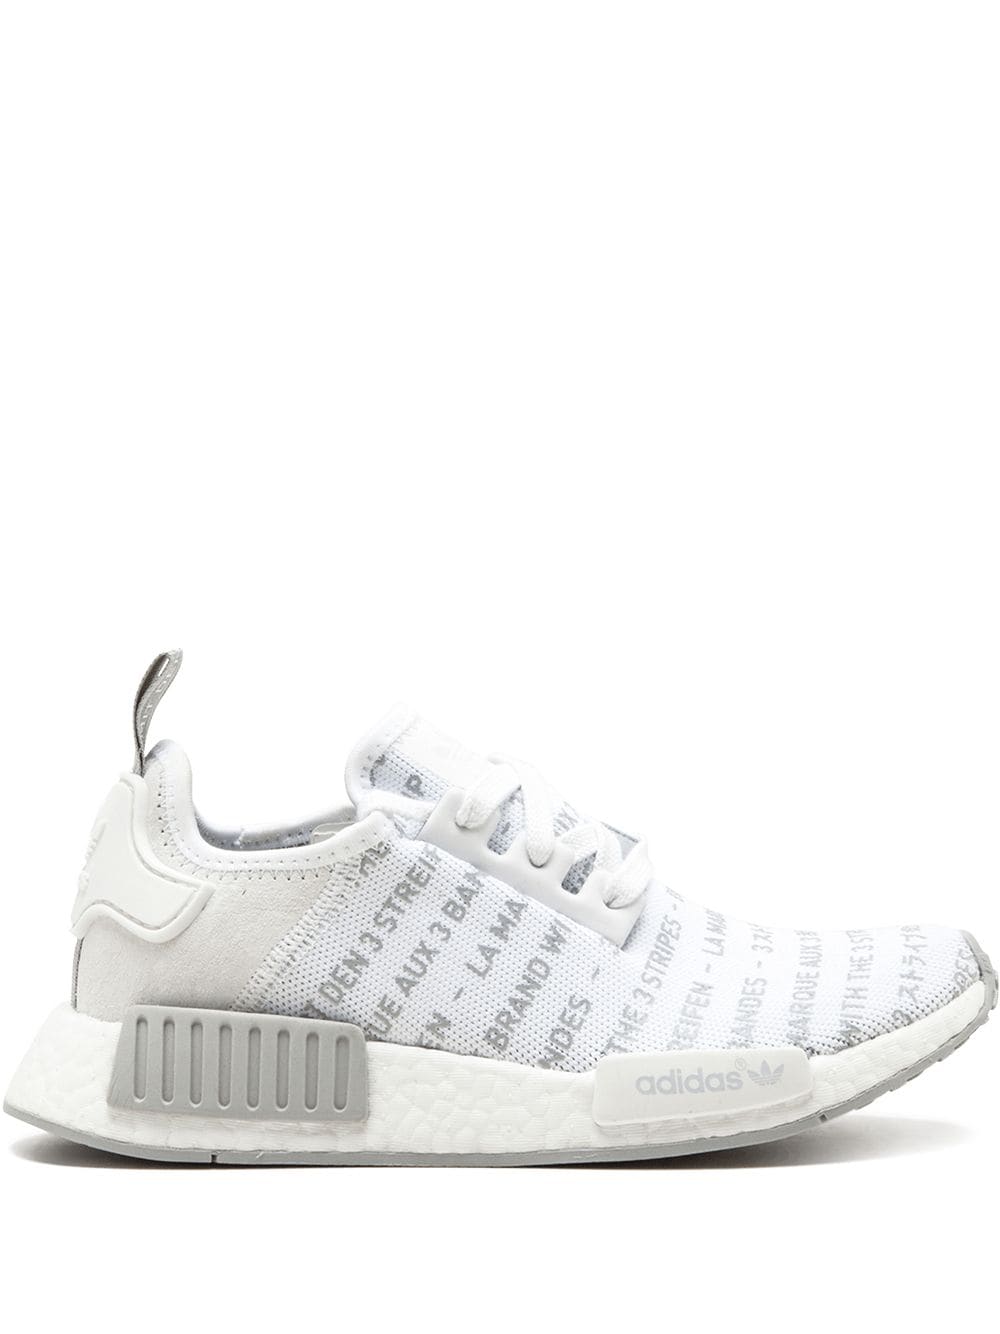 Shop Adidas Originals Nmd_r1 "3 Stripes" Sneakers In White